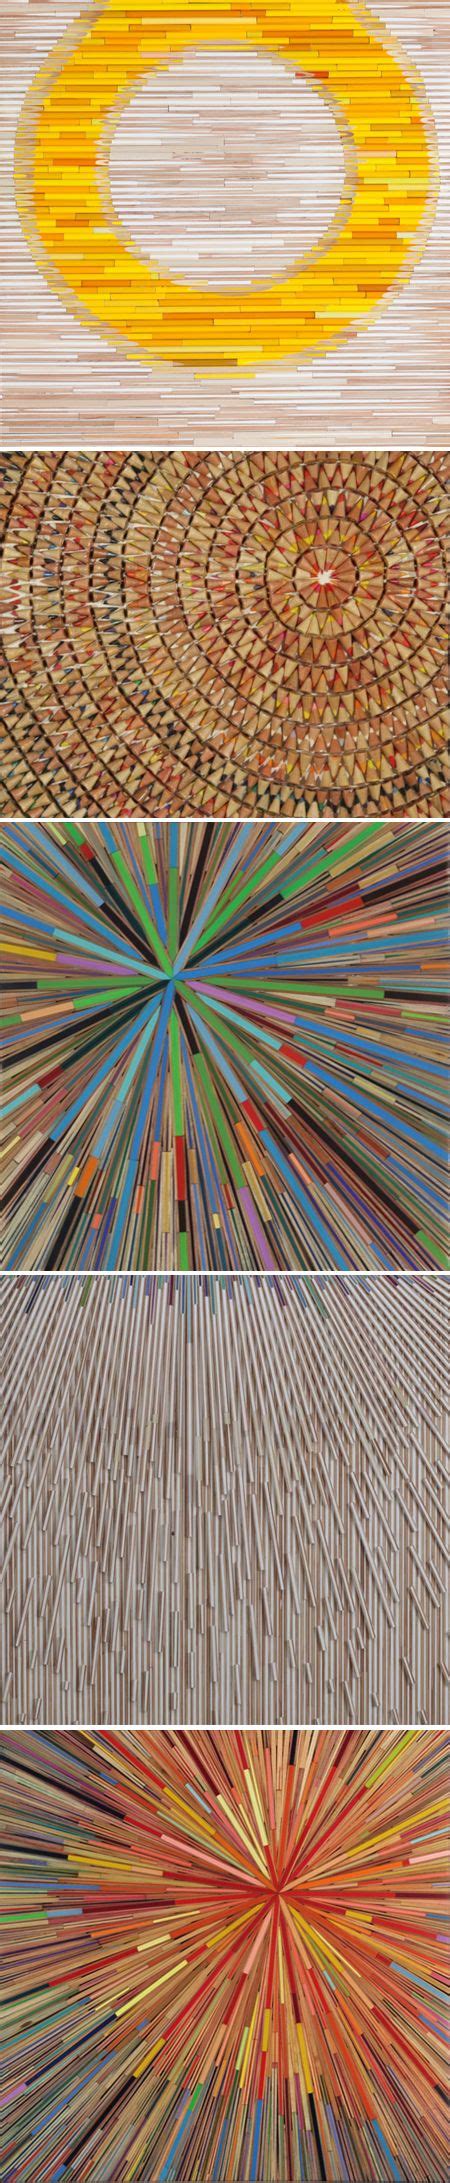 Brightly Hued Colored Pencils Arranged In Stunning Graphic Patterns